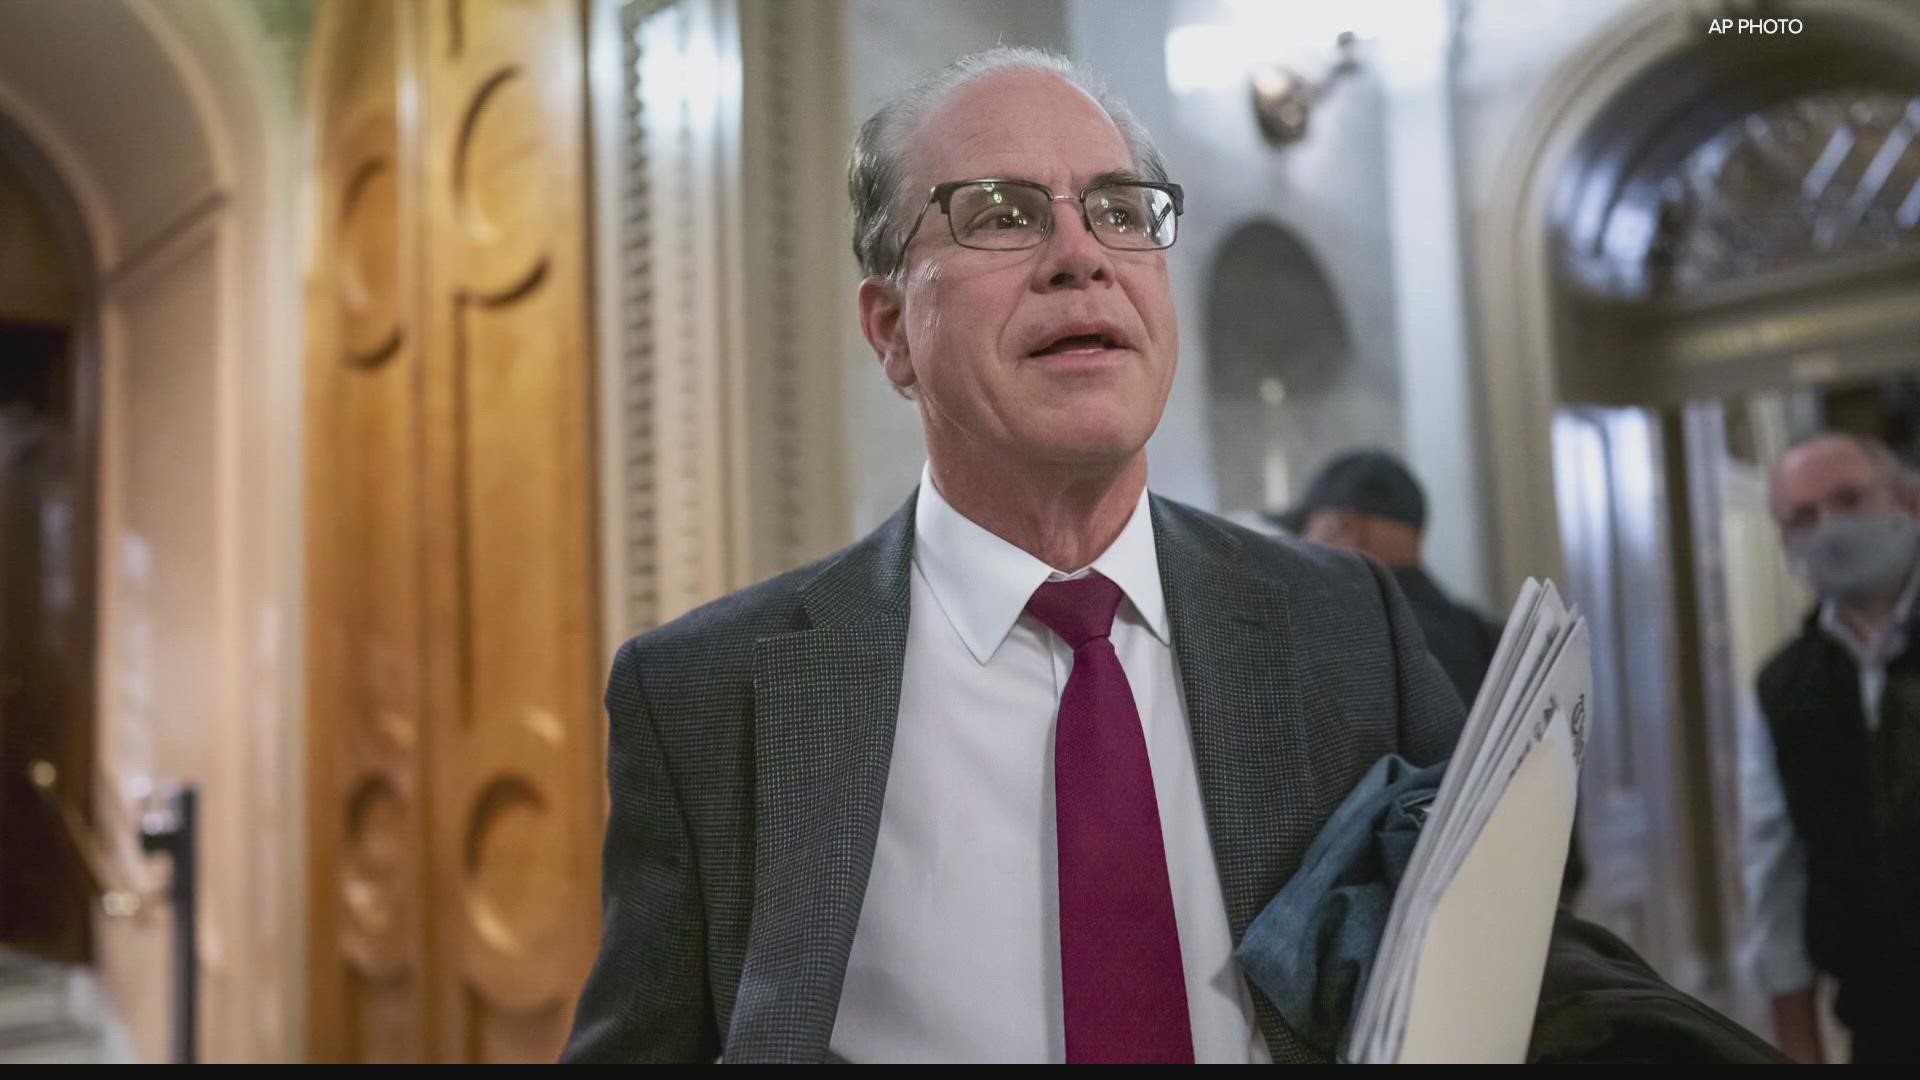 Federal election officials just published a report that determined Indiana Senator Mike Braun's 2018 campaign broke finance rules.